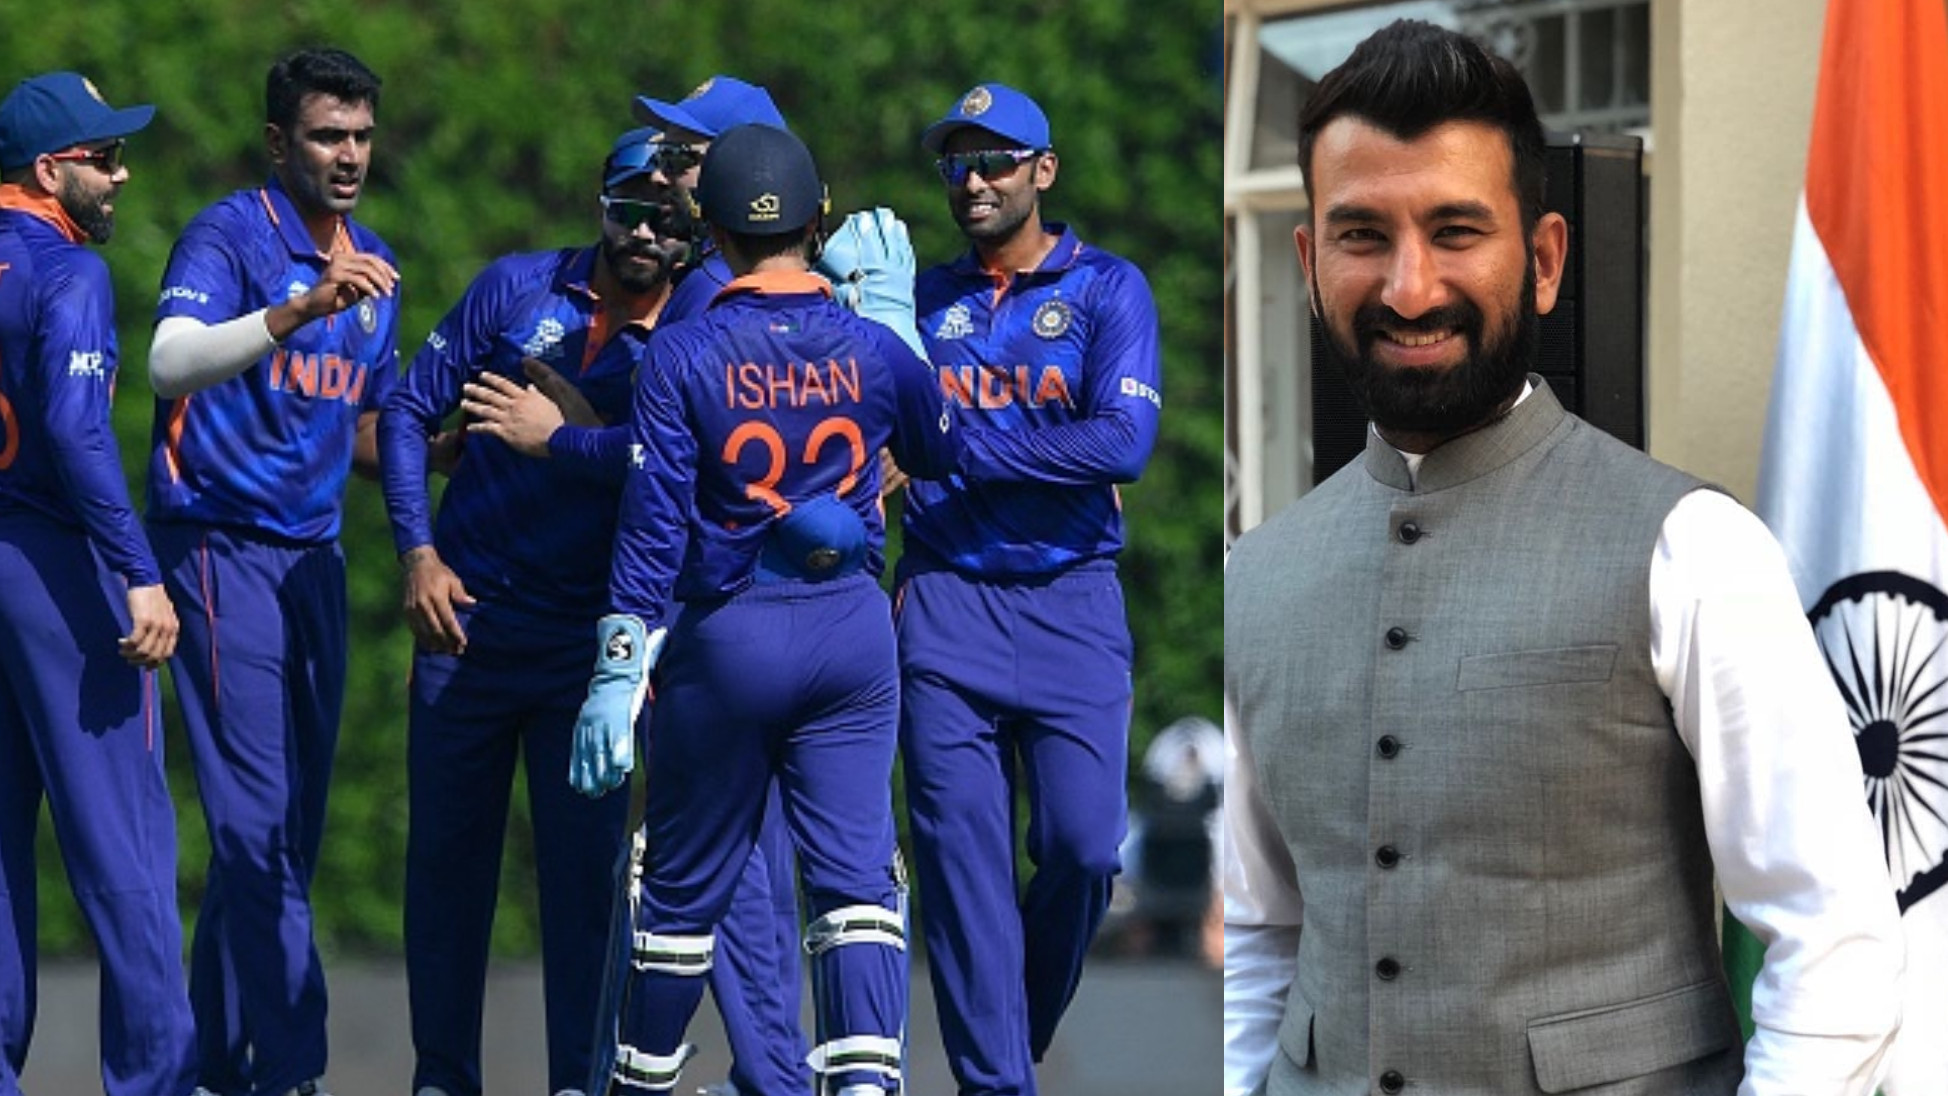 T20 World Cup 2021: India has a balanced side and has good chance to win the title- Cheteshwar Pujara